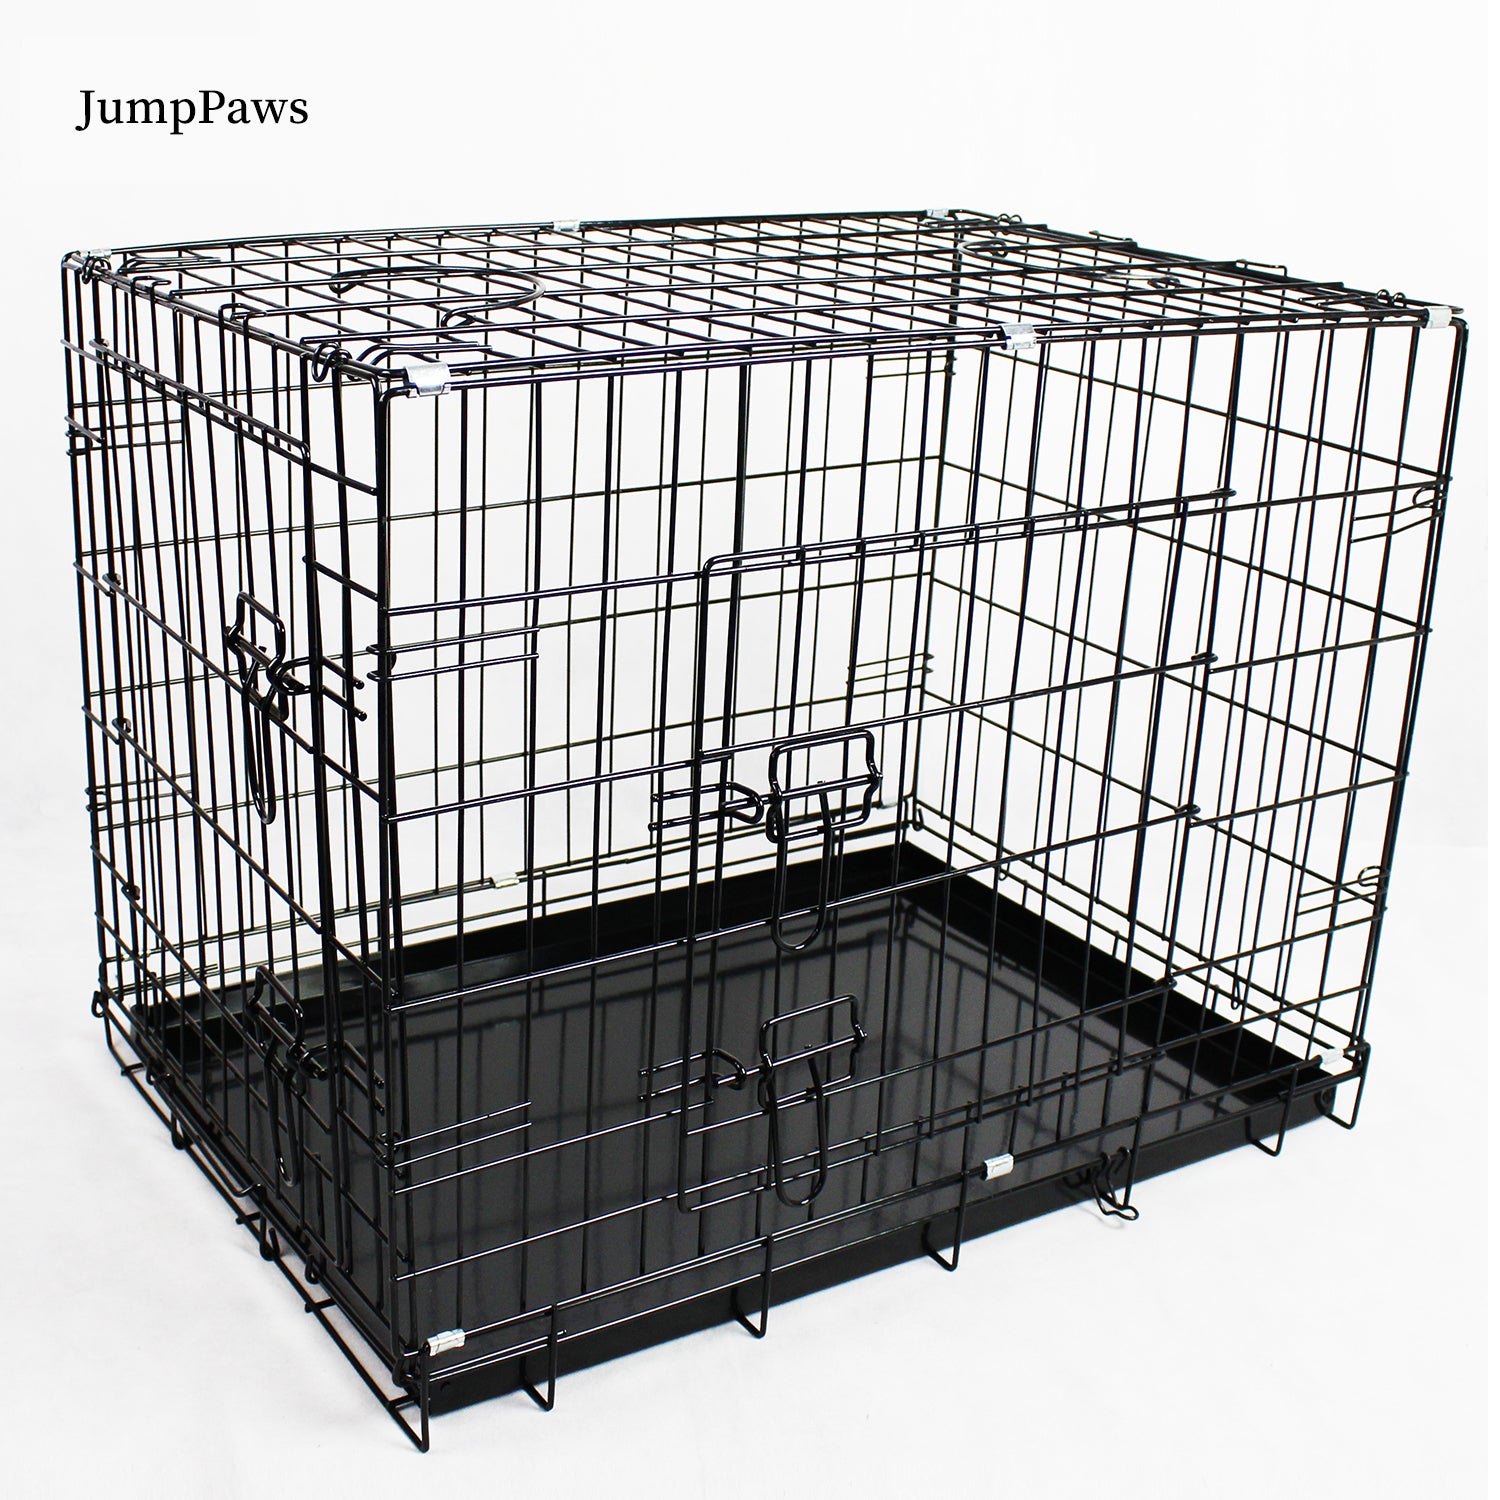 JumpPaws Dog Kennels for Household, Folding Metal Pet Kennel Wire Cage, Black, 30"L x 21"W x 23"H